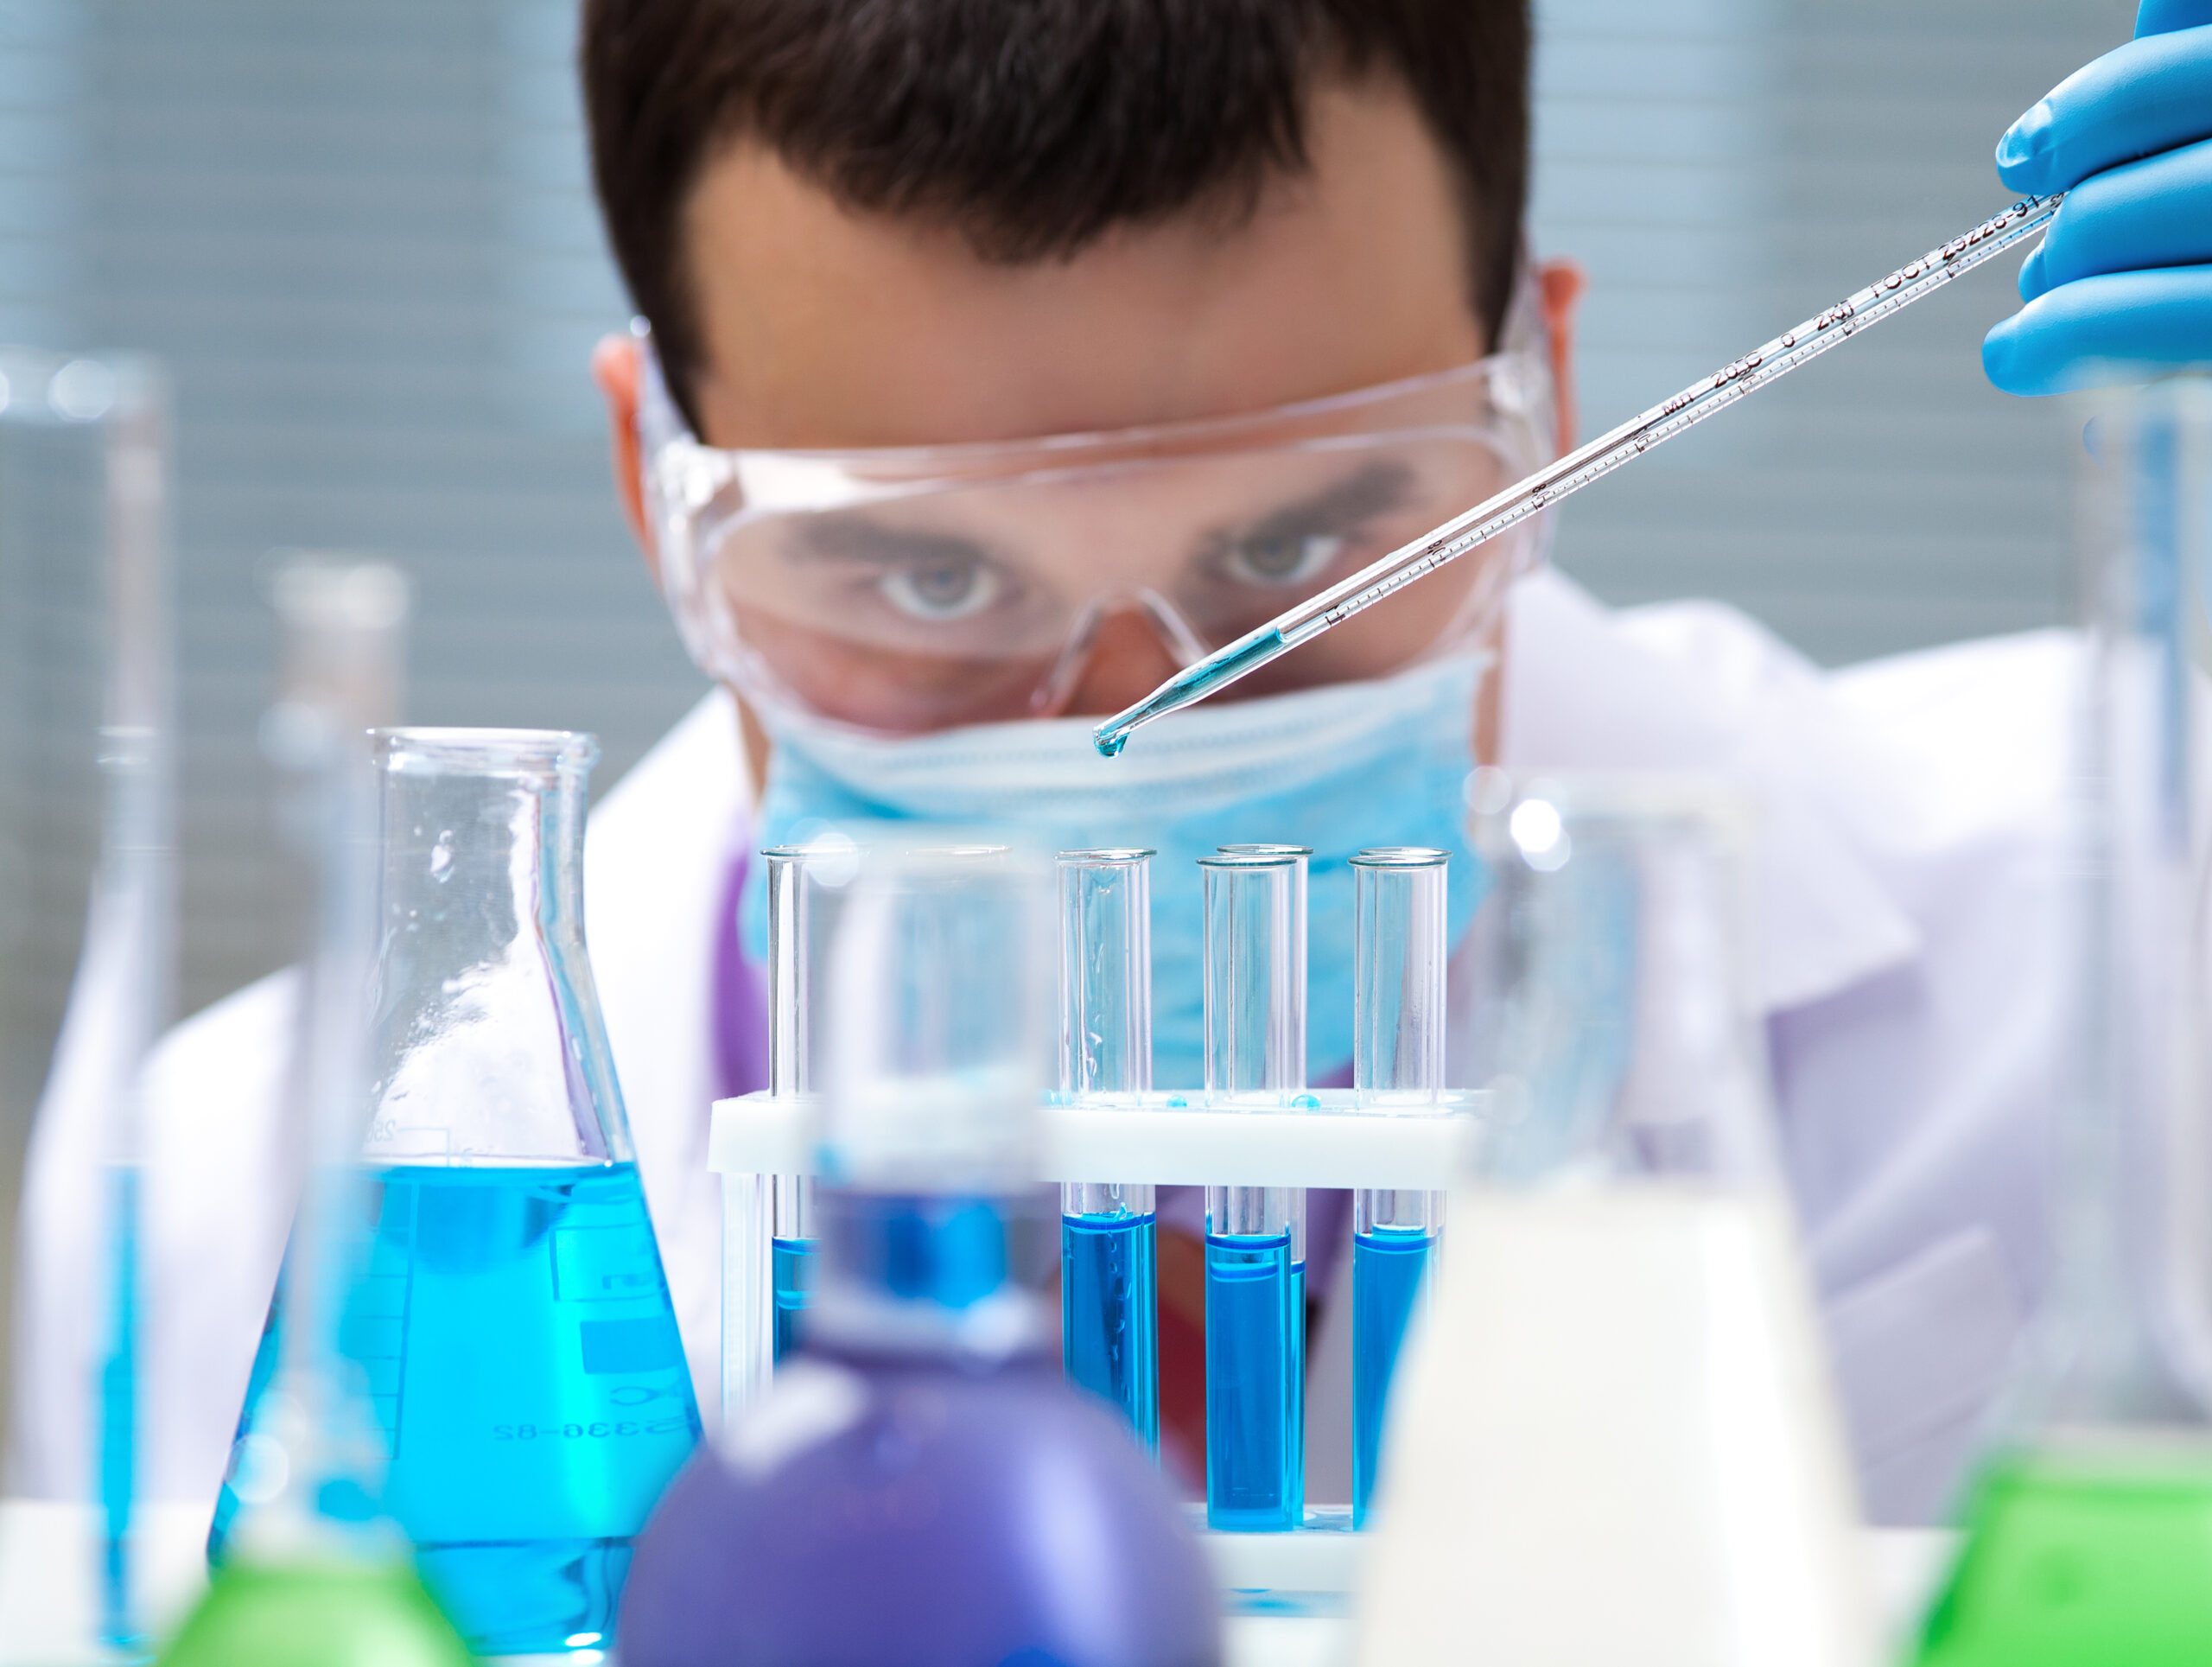 A scientist is conducting experiments involving the combination of various chemicals